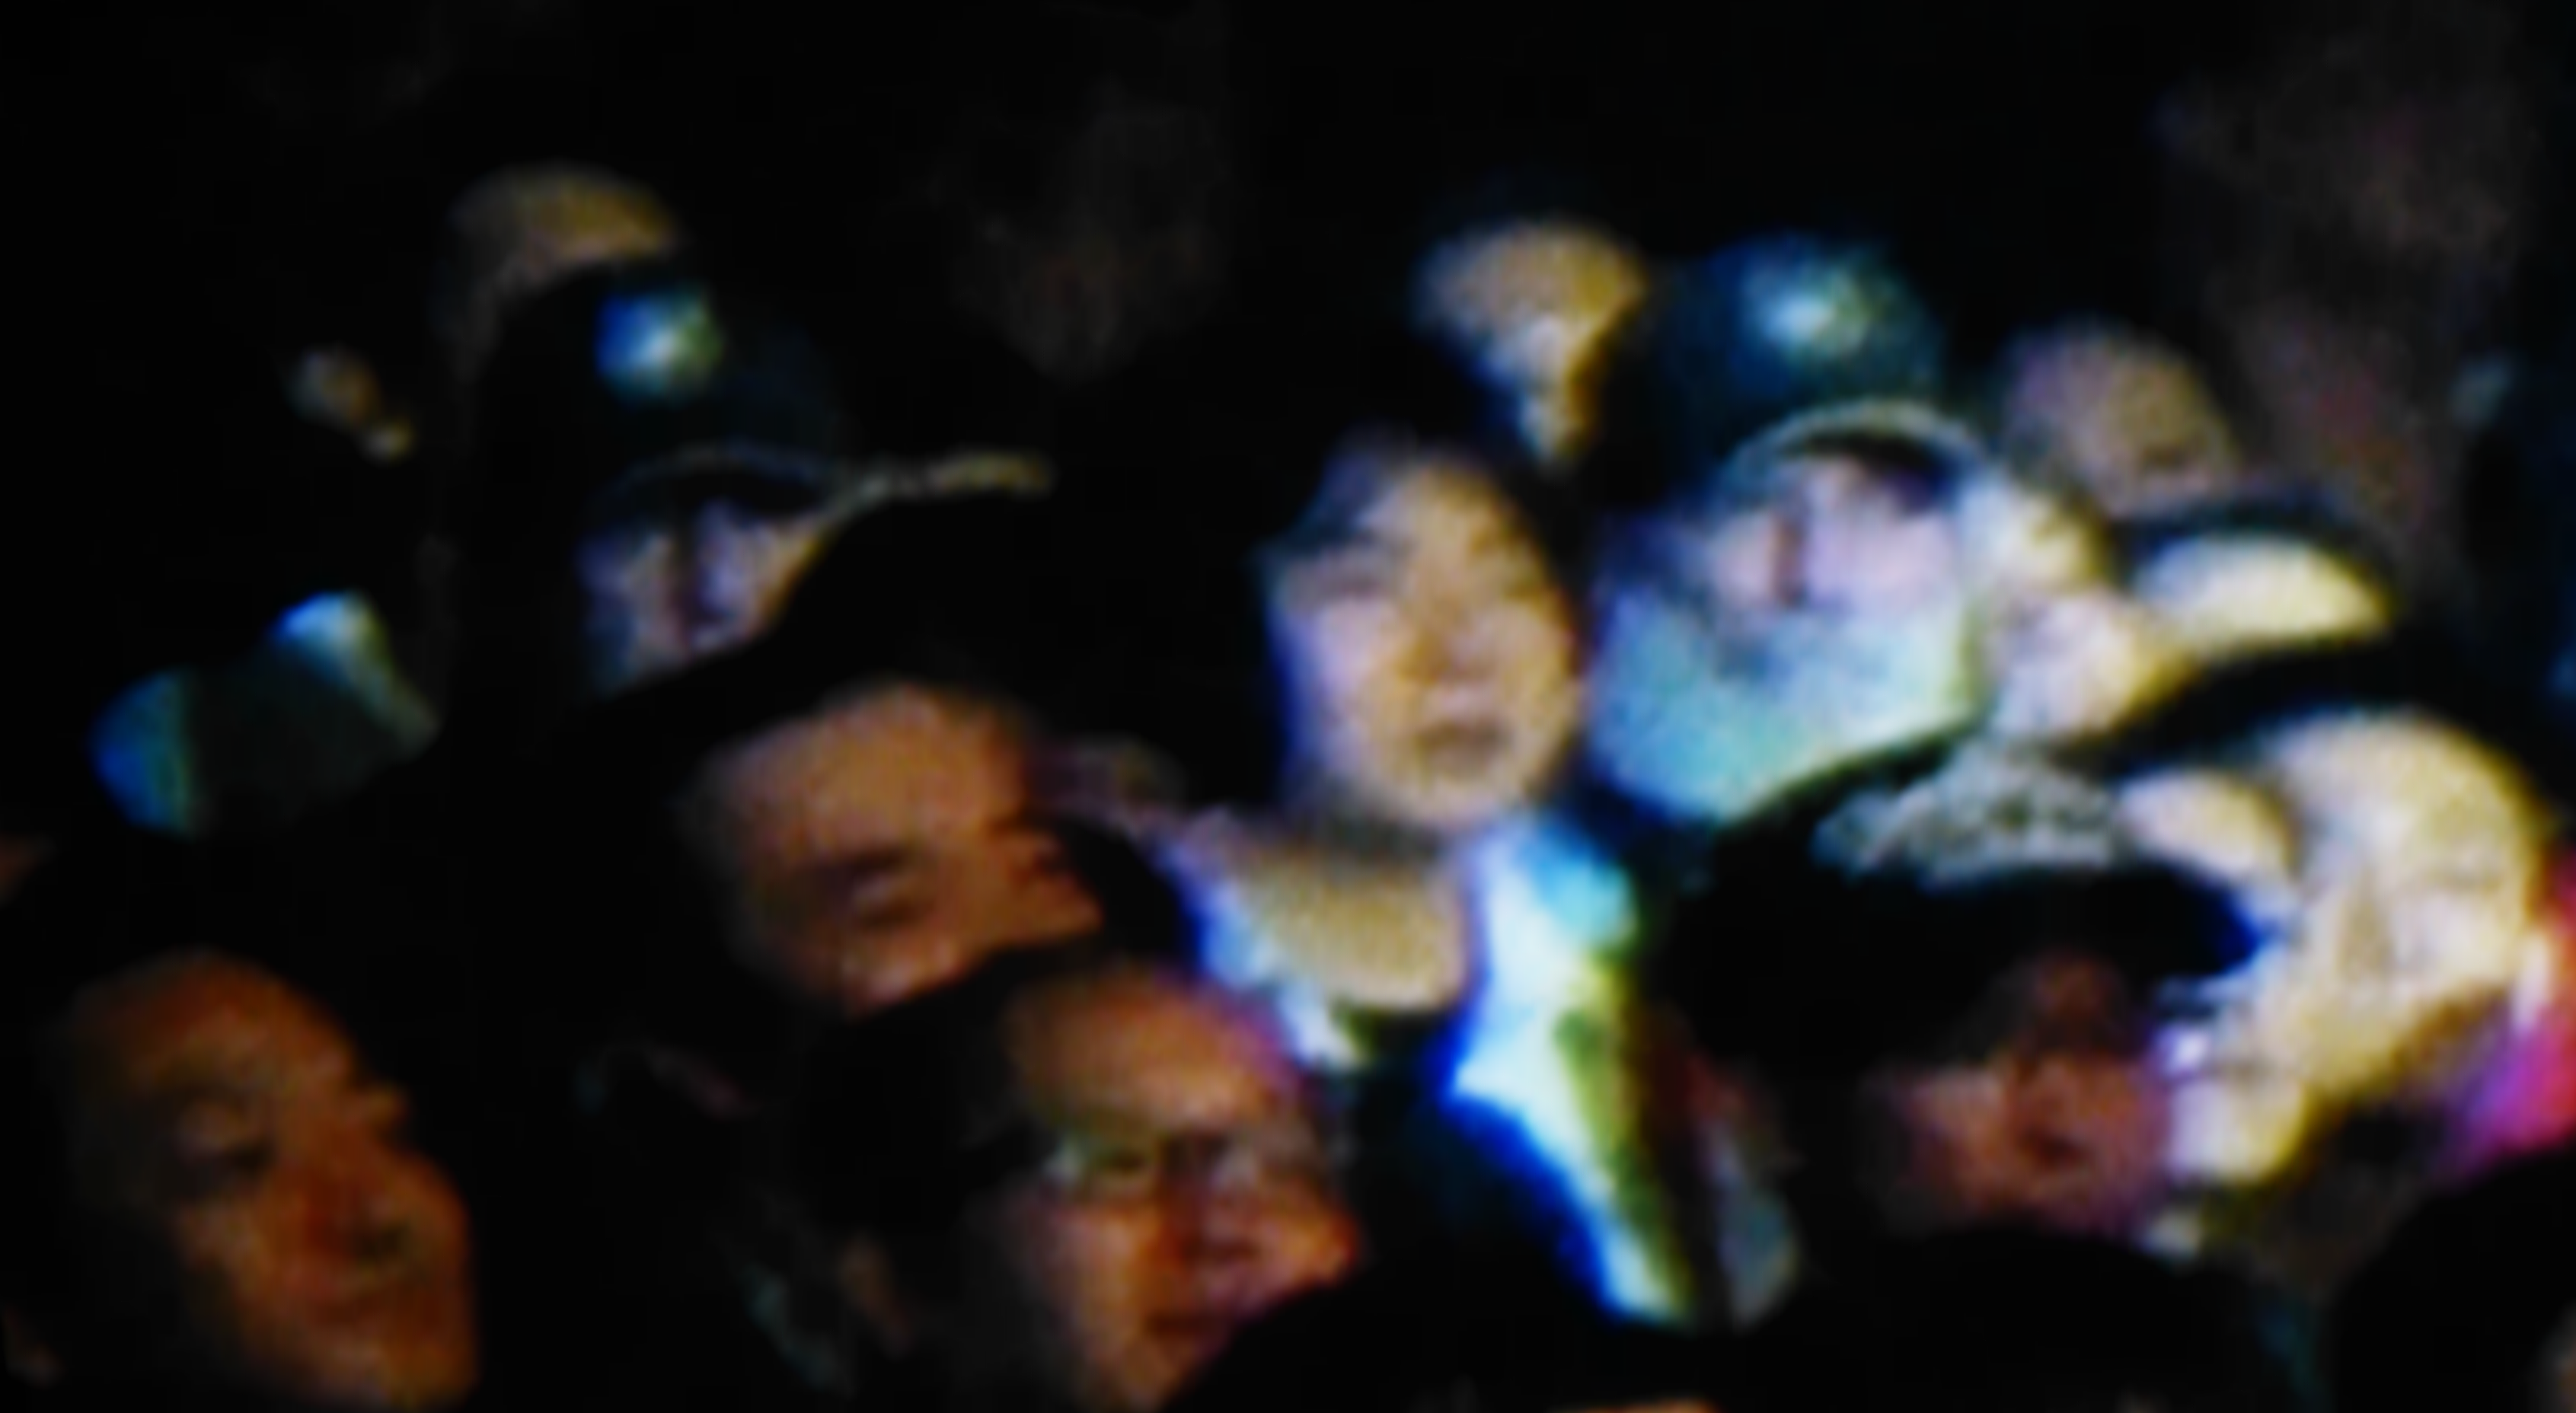 chris and earl in the crowd